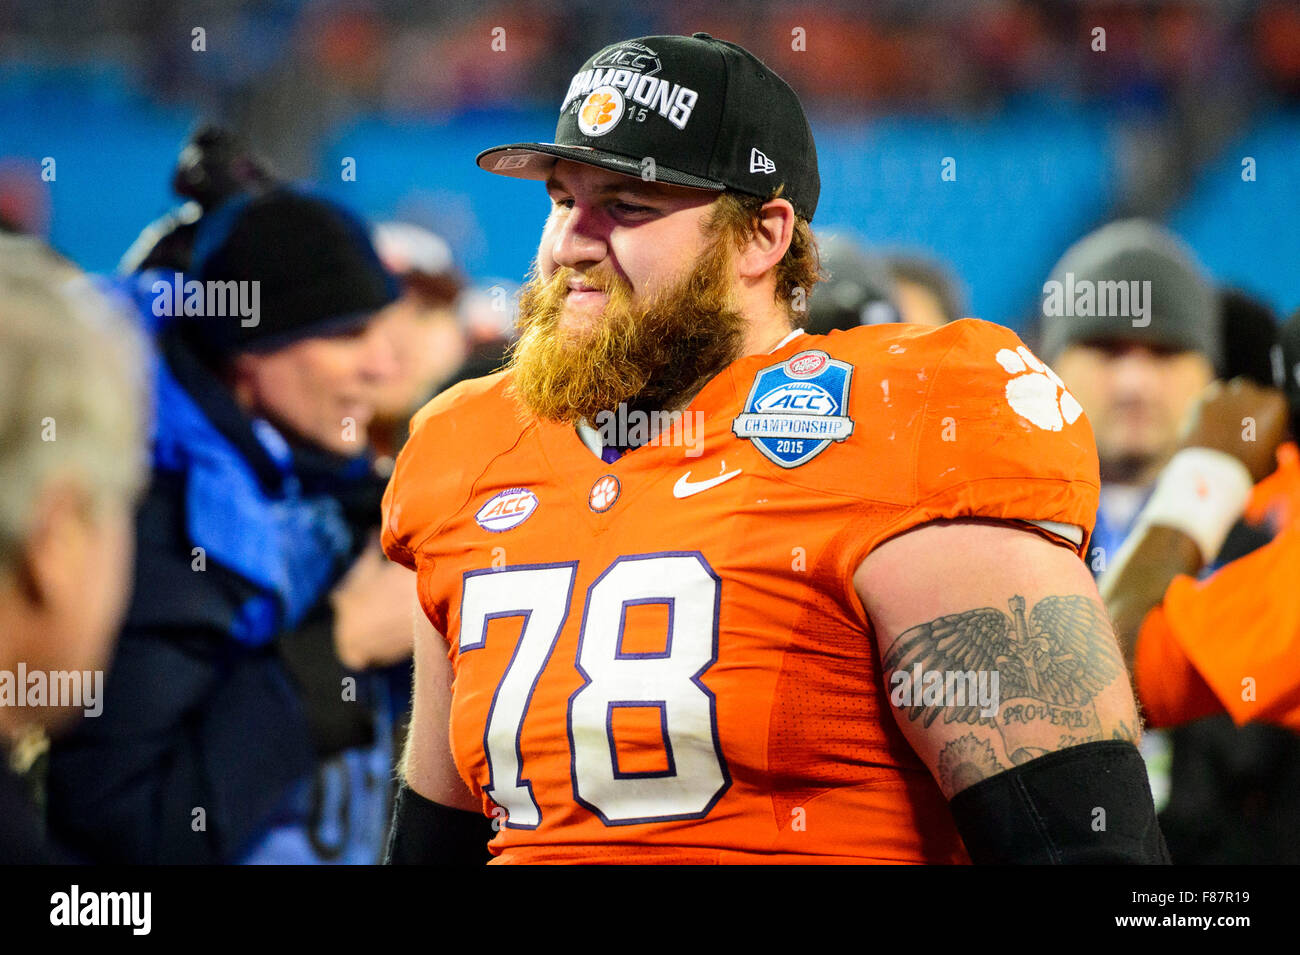 Clemson offensive lineman Eric Mac Lain (78) during the ACC College Football Championship game between North Carolina and Clemson on Saturday Dec. 5, 2015 at Bank of America Stadium, in Charlotte, NC. Stock Photo